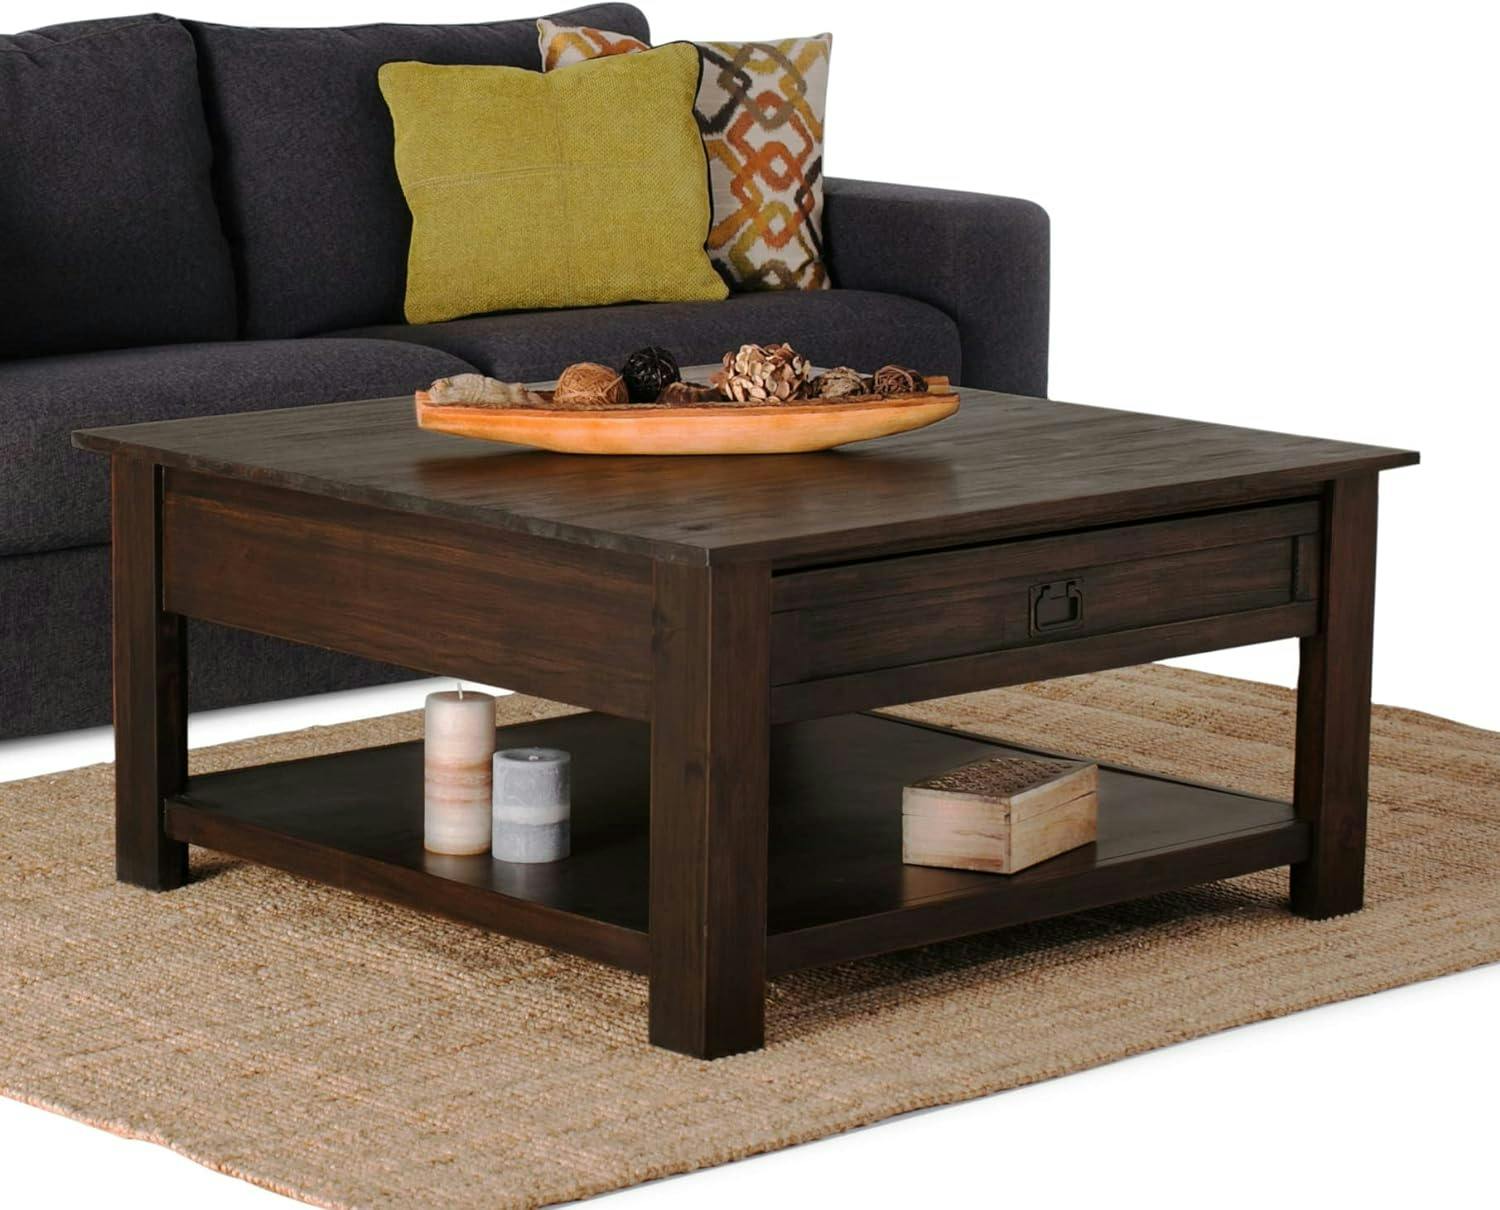 Rustic Acacia Wood Square Coffee Table with Storage in Charcoal Brown